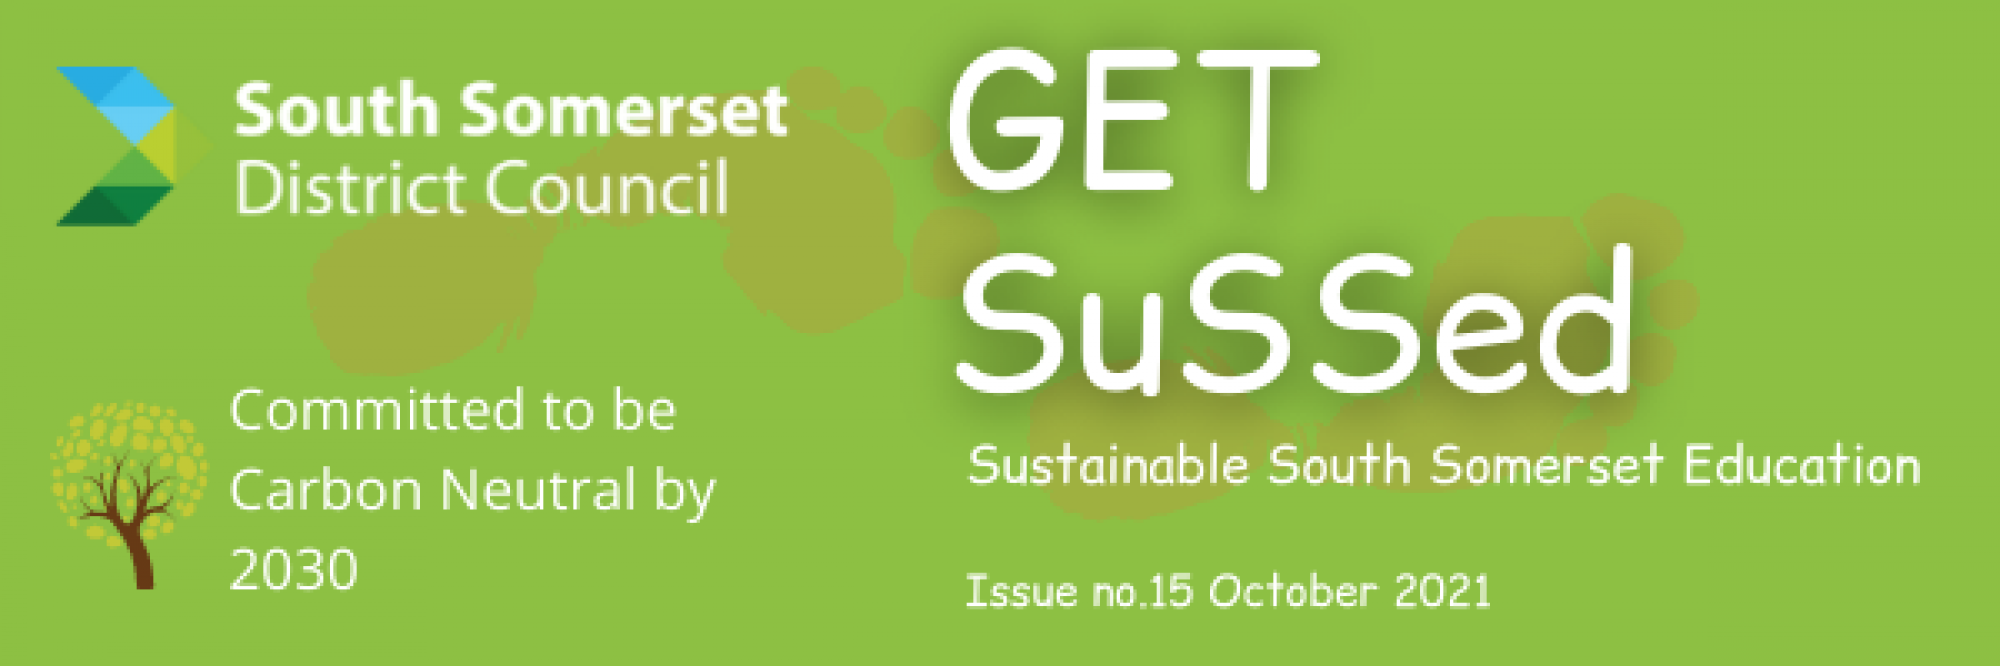 💚Here is Get SuSSed! ENVIRONMENT NEWS,GRANTS,LEARNING AND MORE!💚